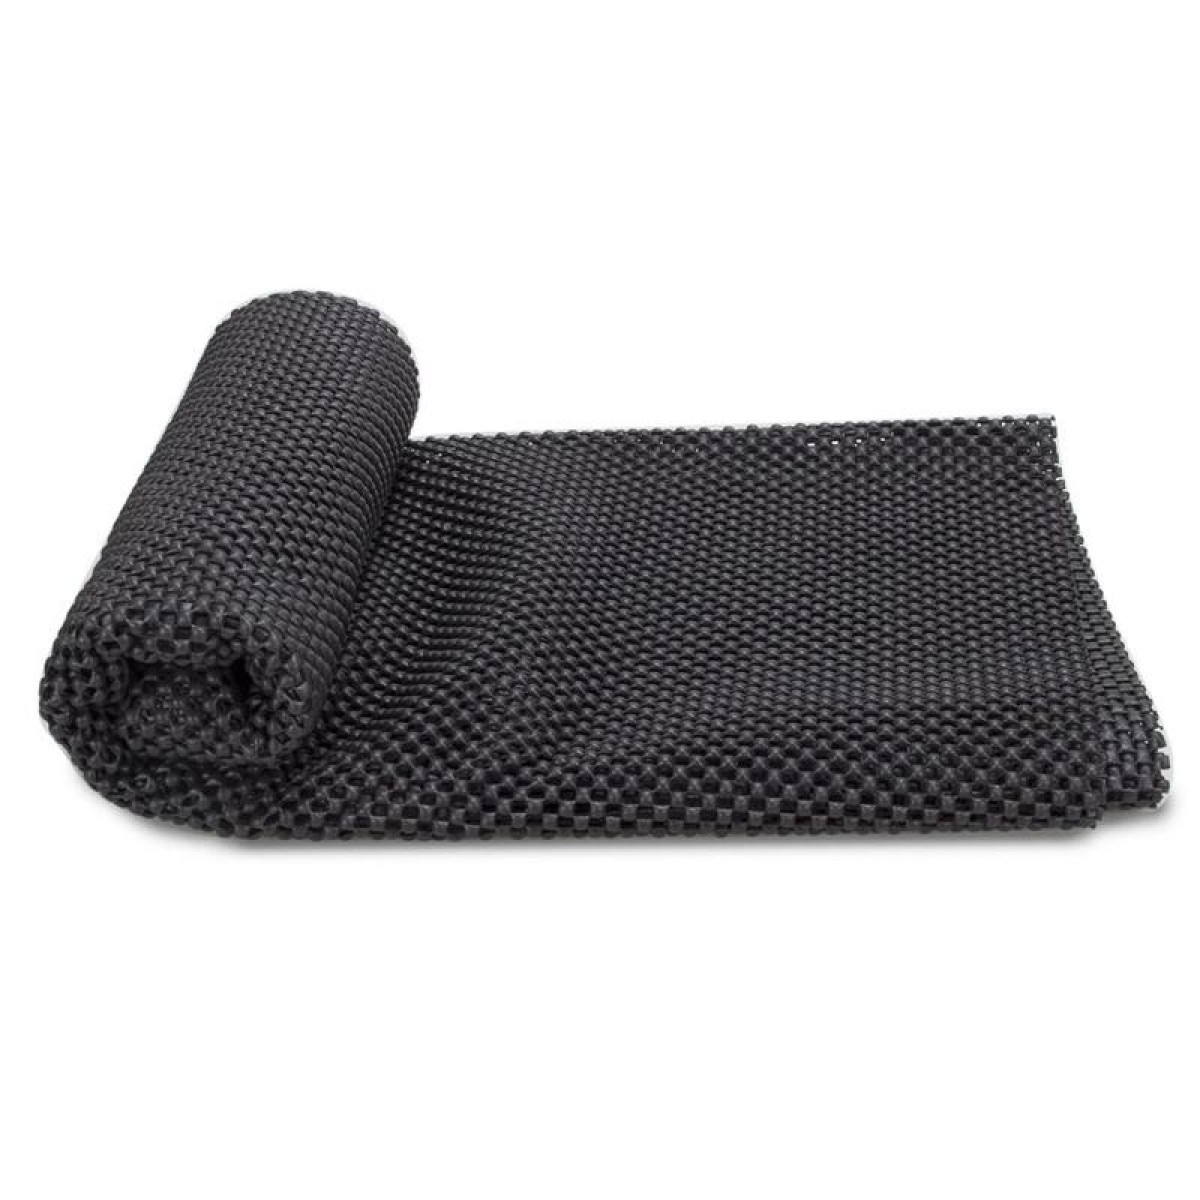 600D Oxford Cloth Car Roof Waterproof Luggage Storage Bag, Style:100x100cm Non-slip Mat